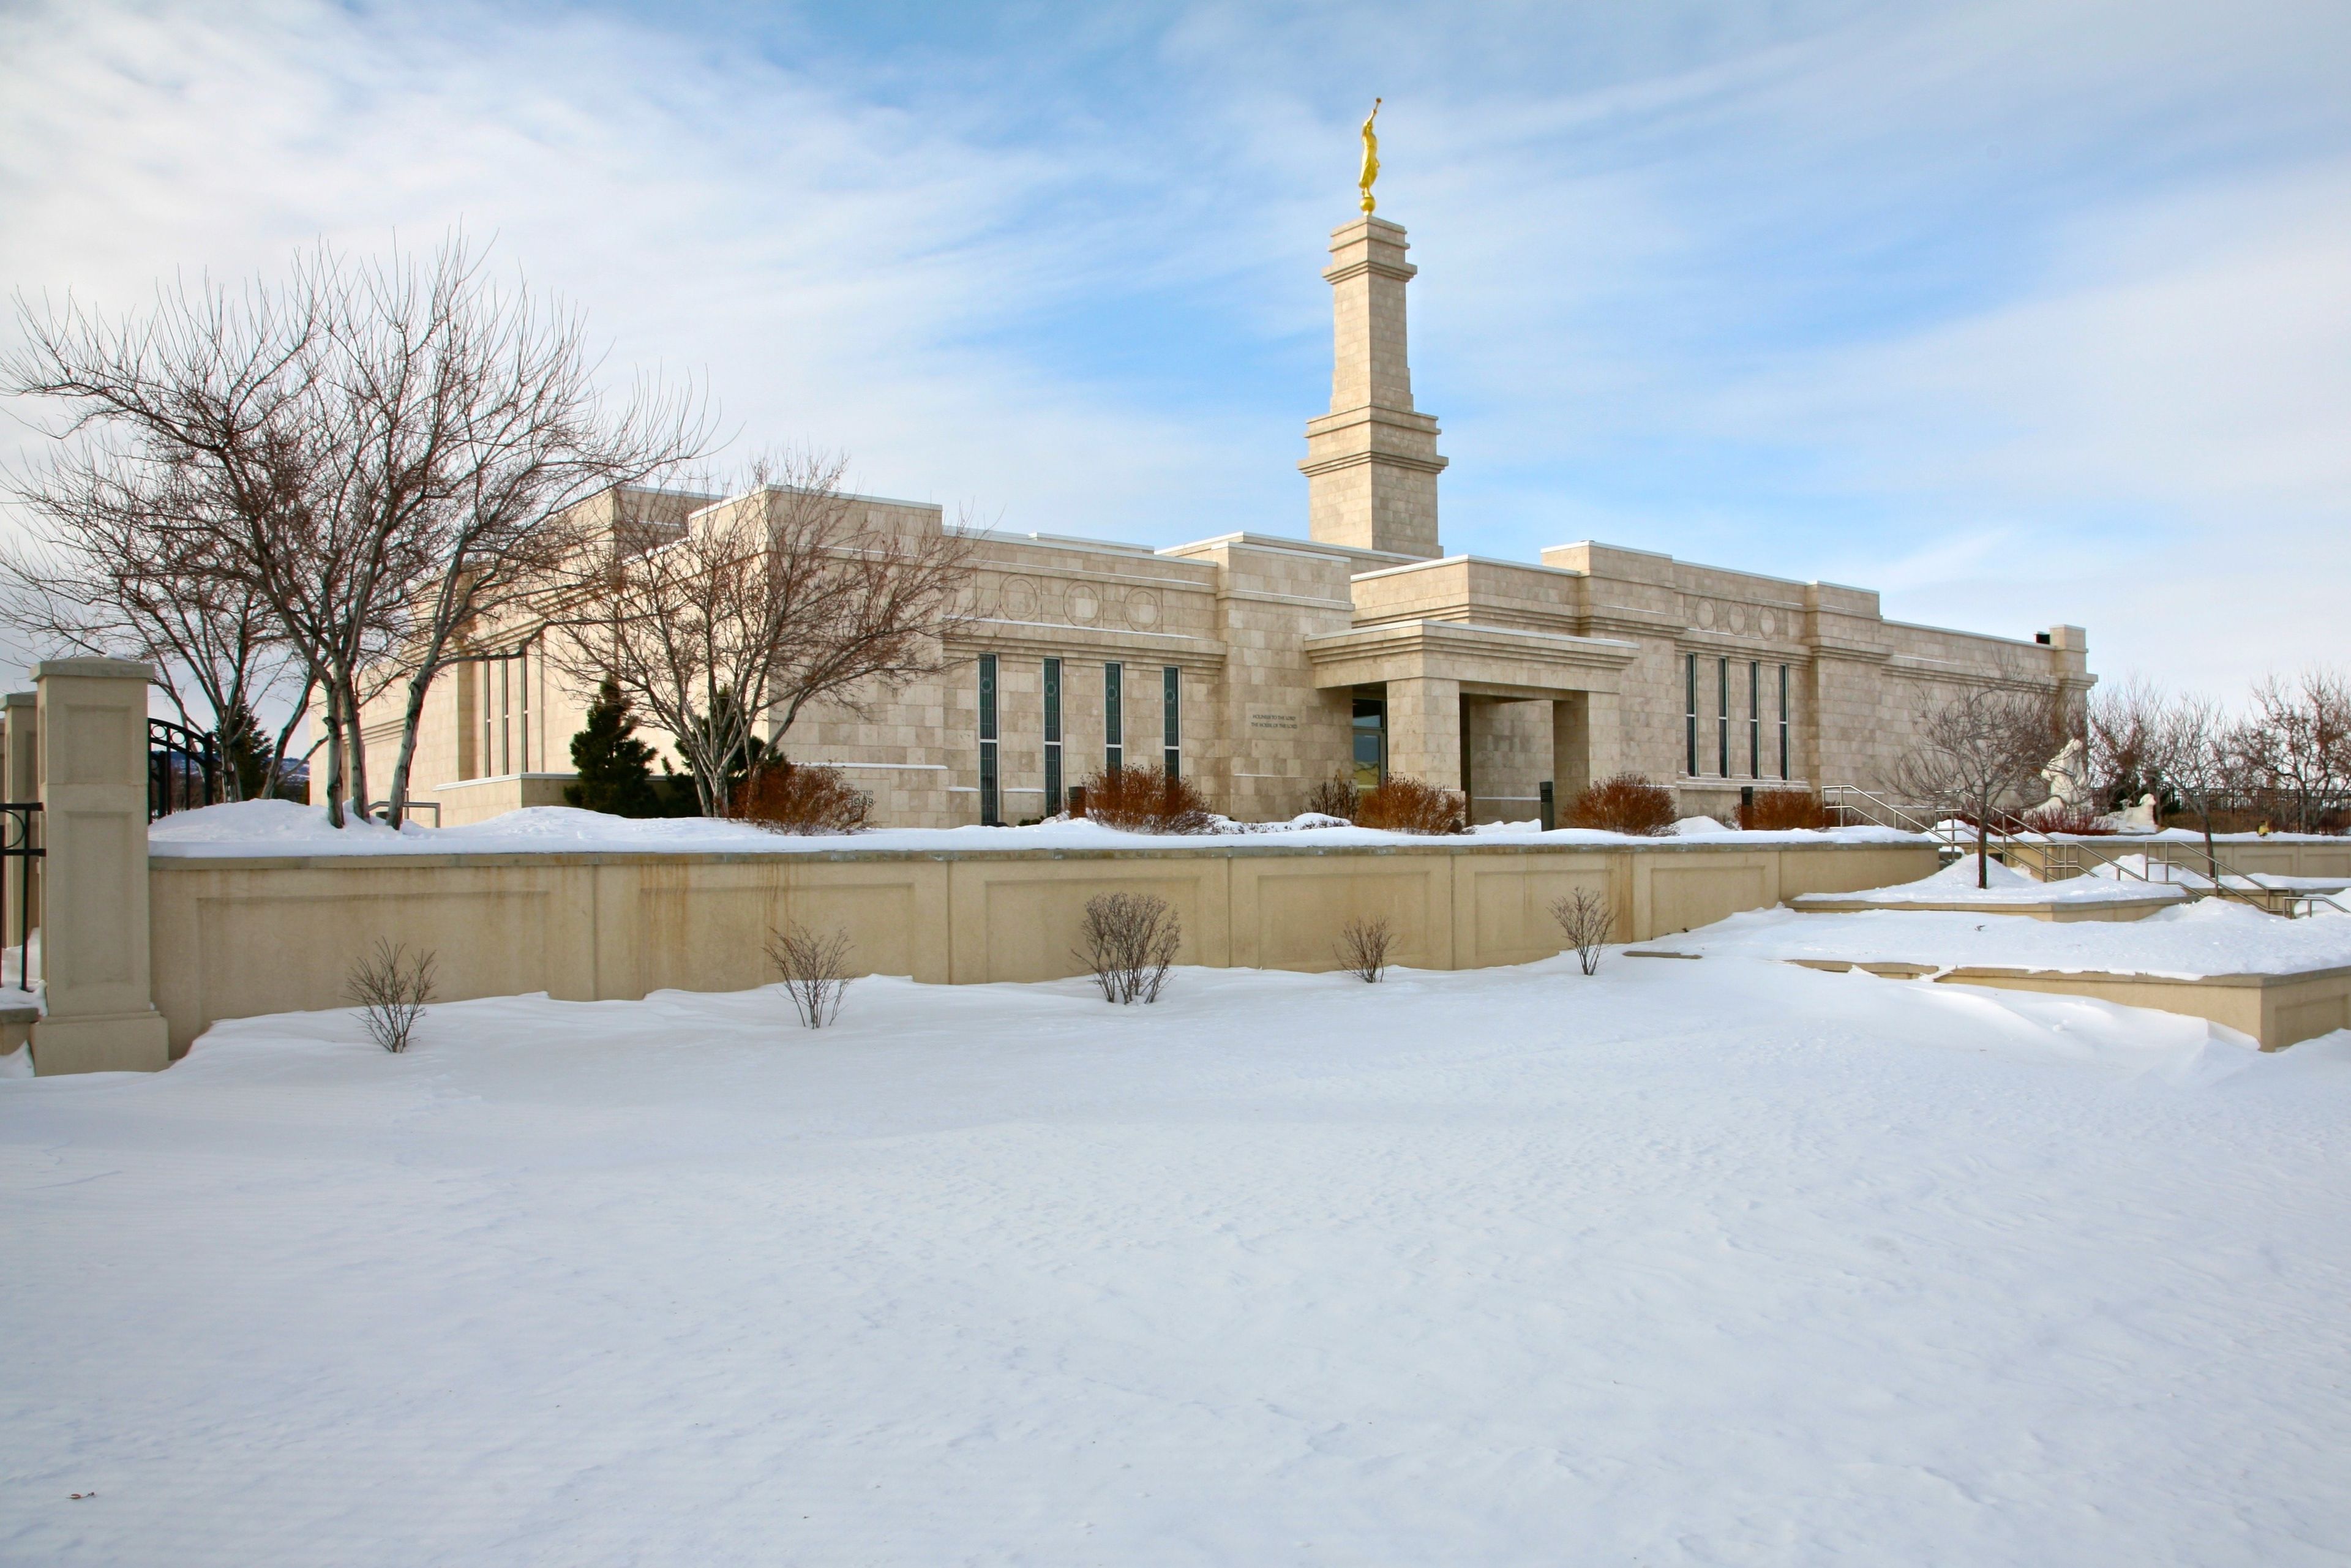 The Monticello Utah Temple in the winter, including the entrance and scenery.